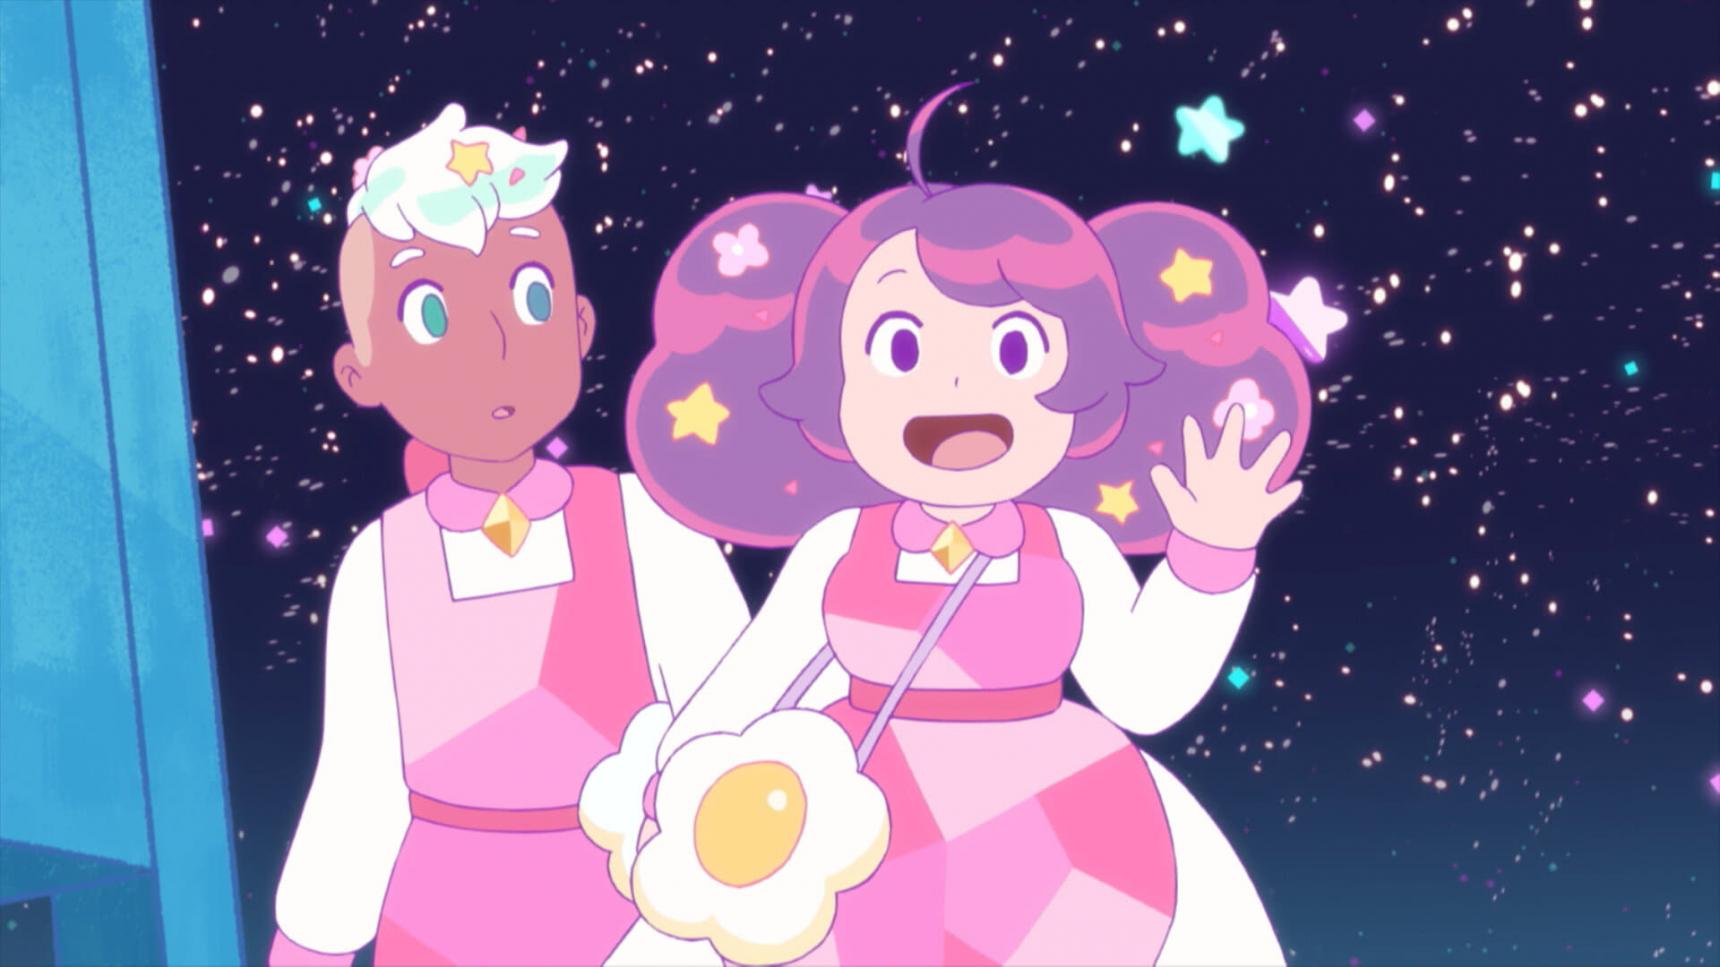 Poster del episodio 3 de Bee and PuppyCat: Lazy in Space online